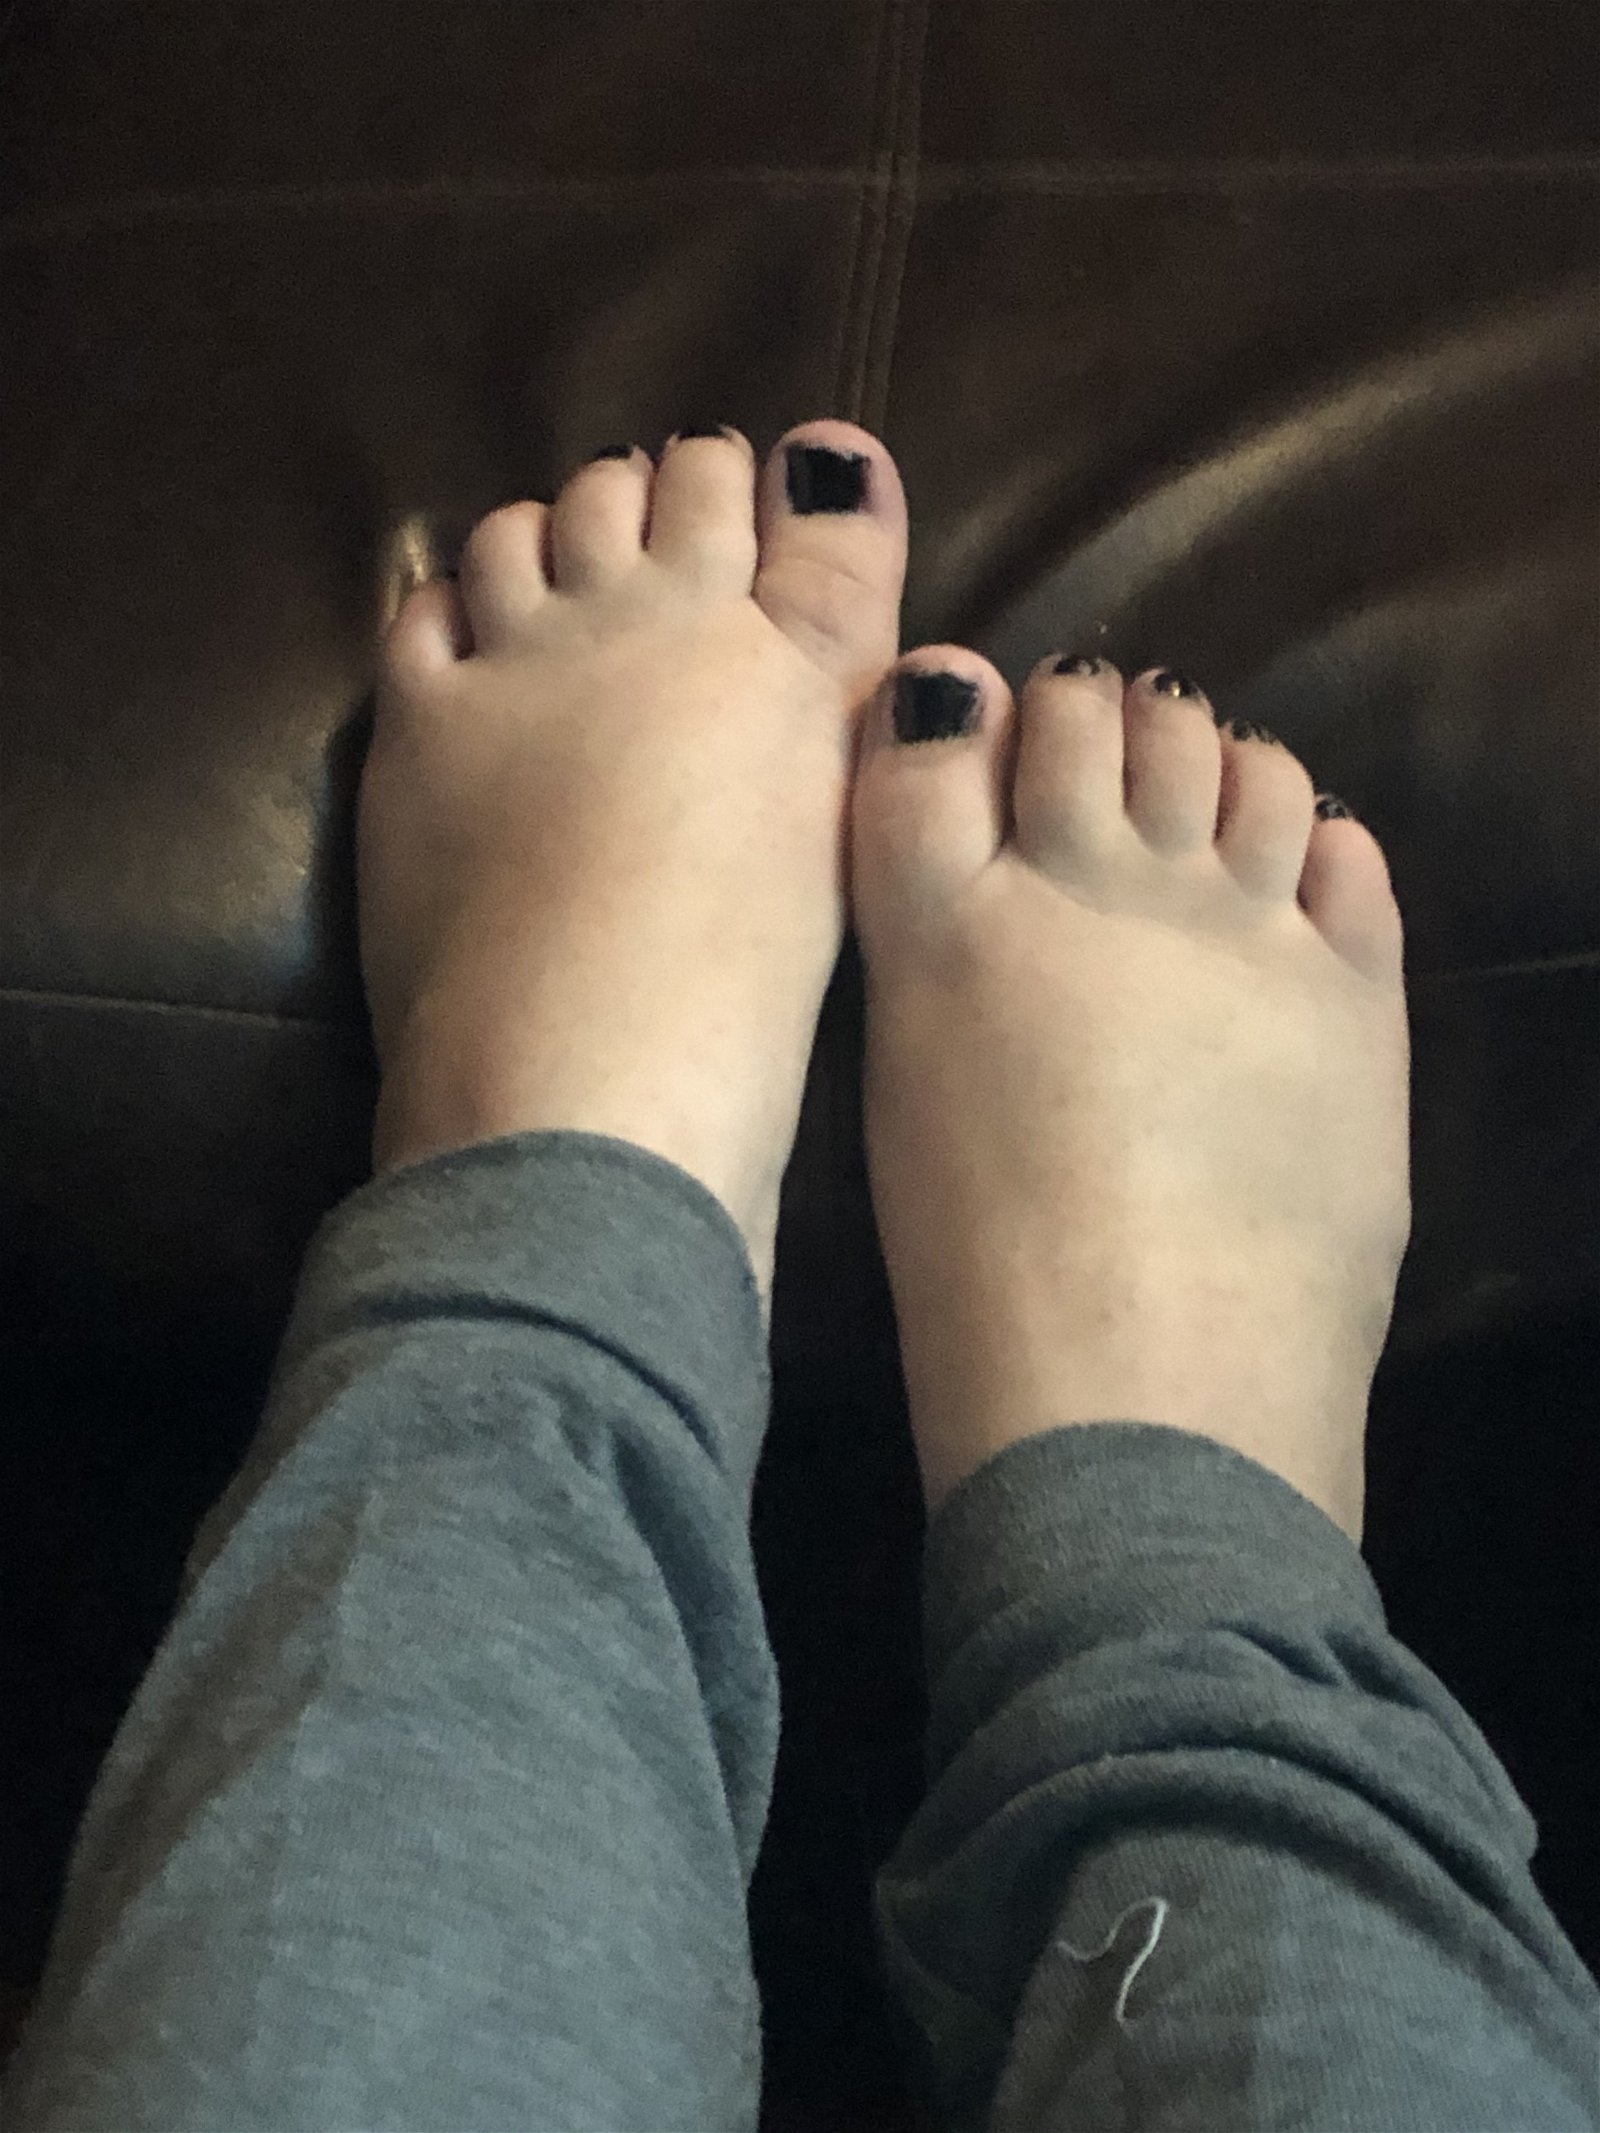 Photo by Mistress BeeBee with the username @MistressBeeBee, who is a star user,  November 9, 2019 at 5:26 PM. The post is about the topic Foot Worship and the text says 'something  for my feet lovers. check out my links! https://linktr.ee/Unnamedmermel'